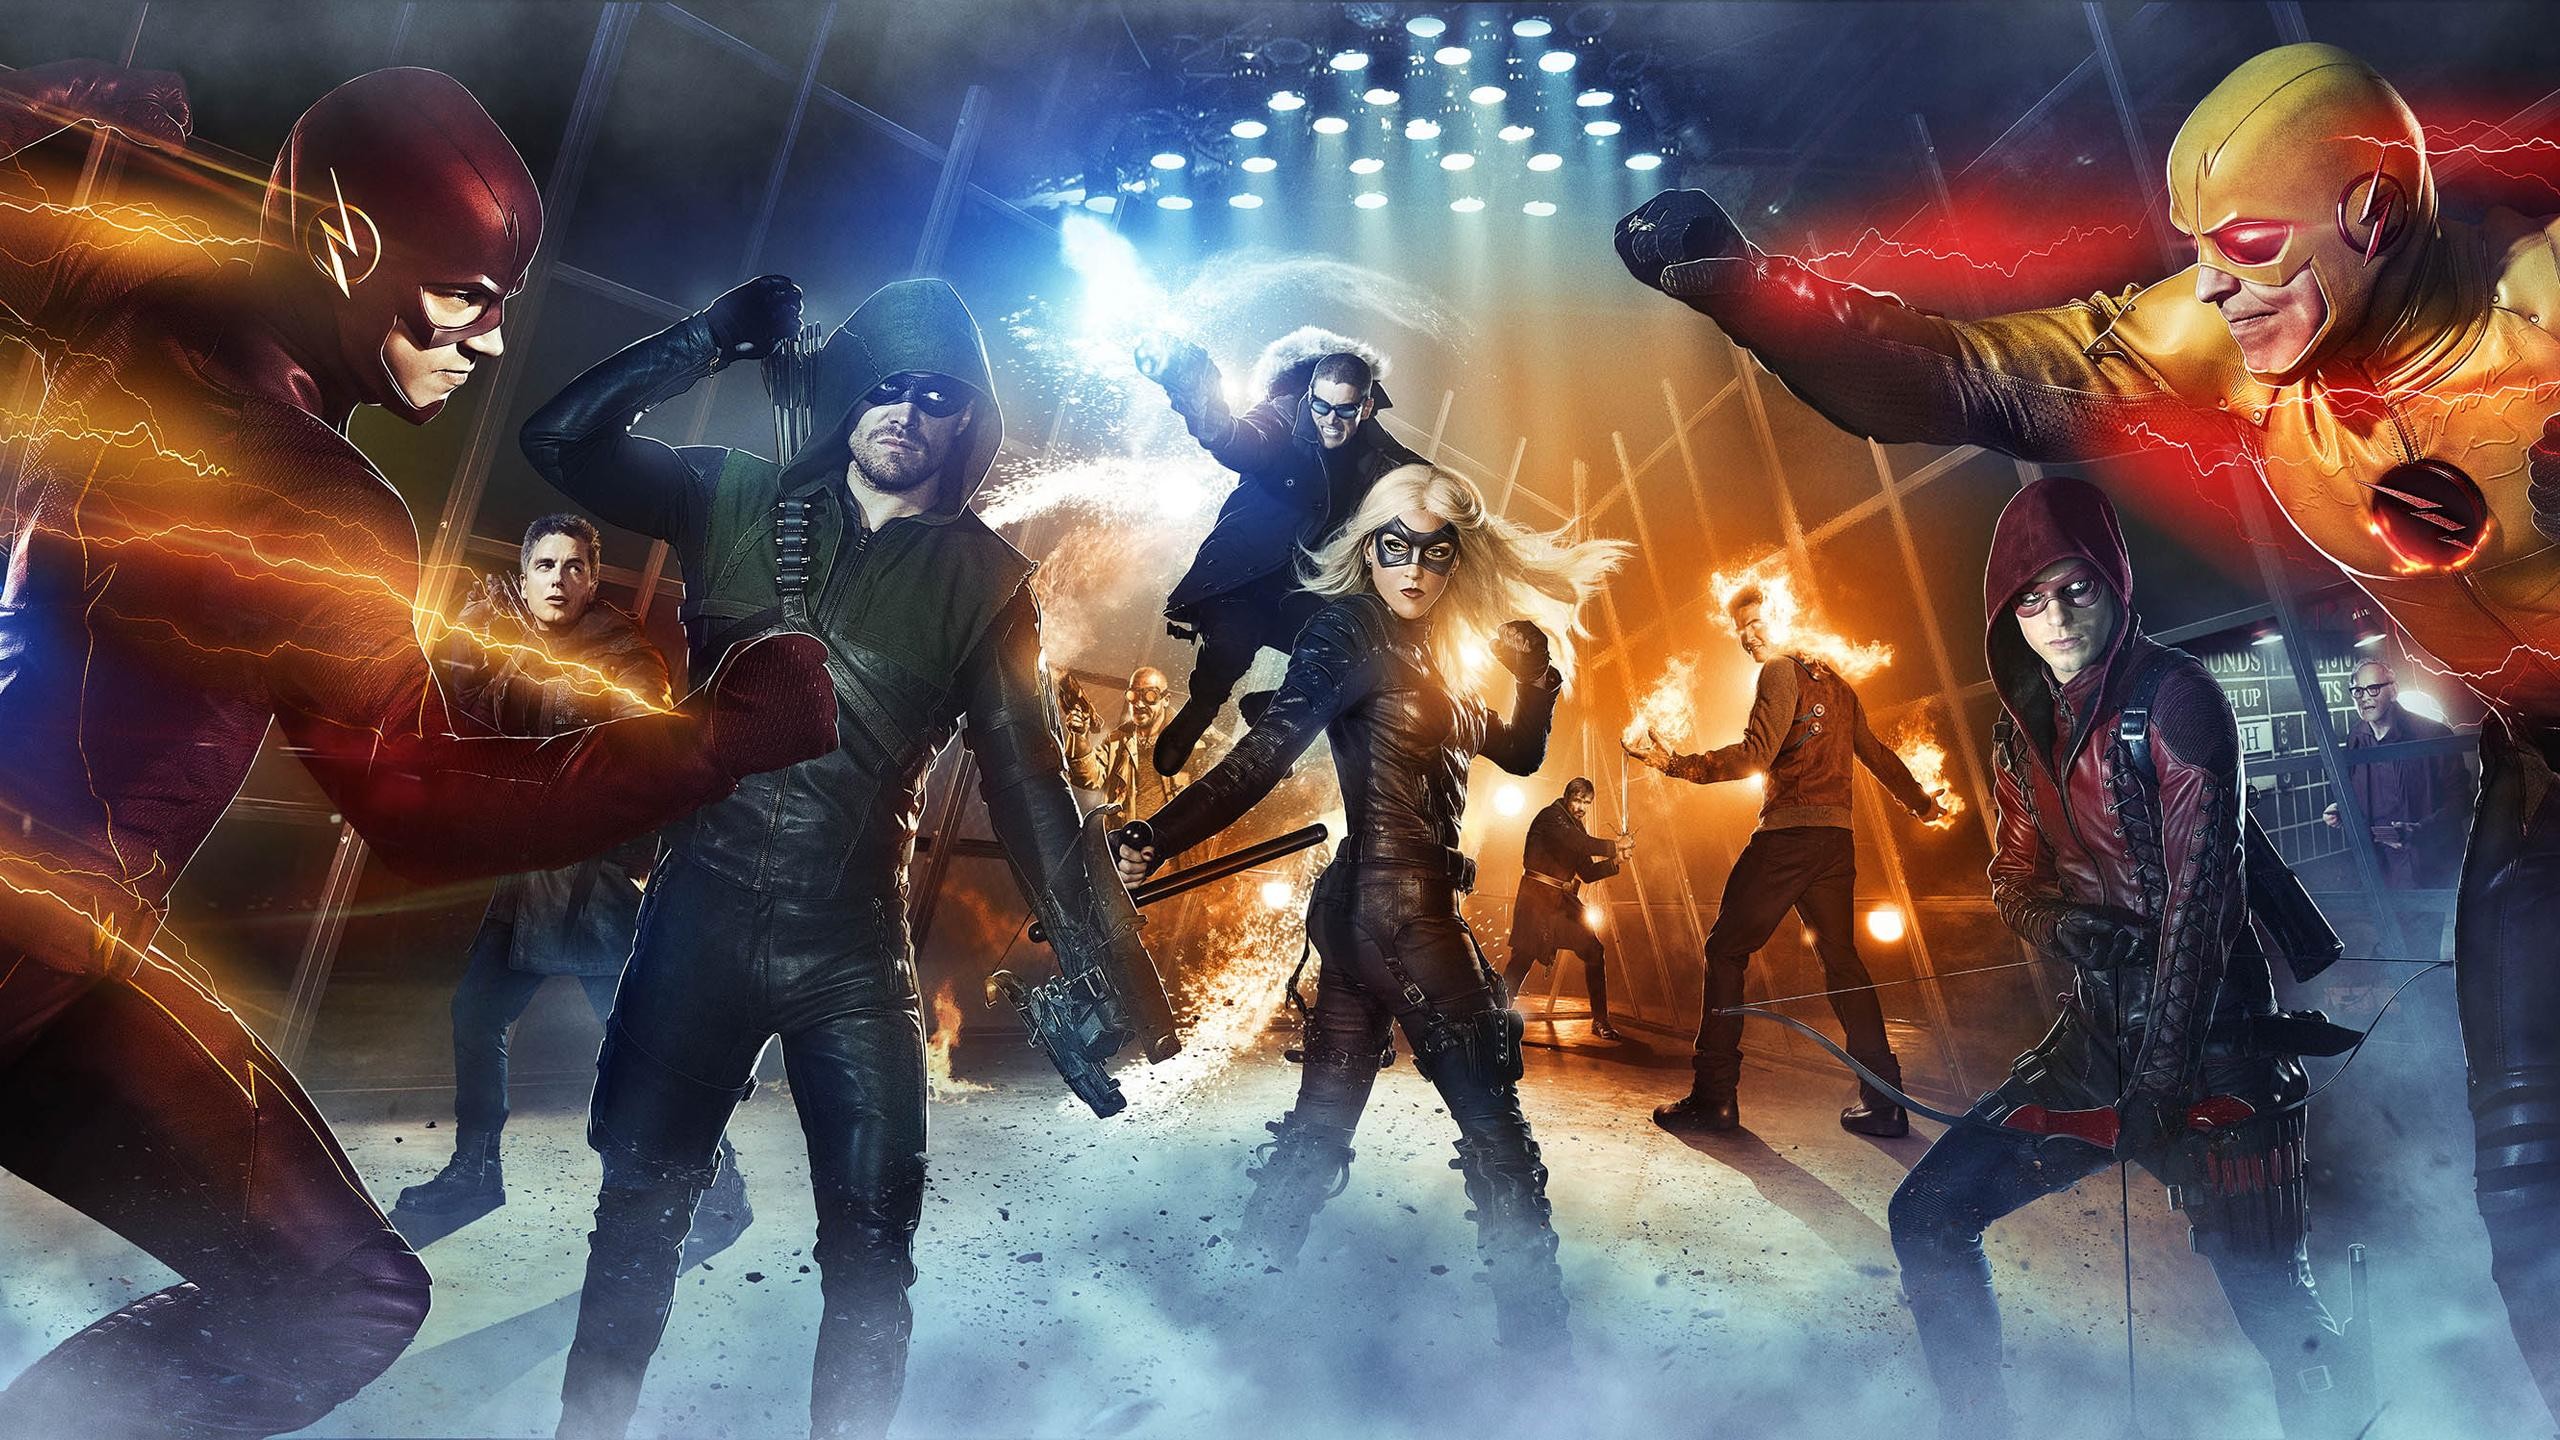 2560x1440 The Flash (CW) images Arrow and The Flash HD wallpaper and background photos